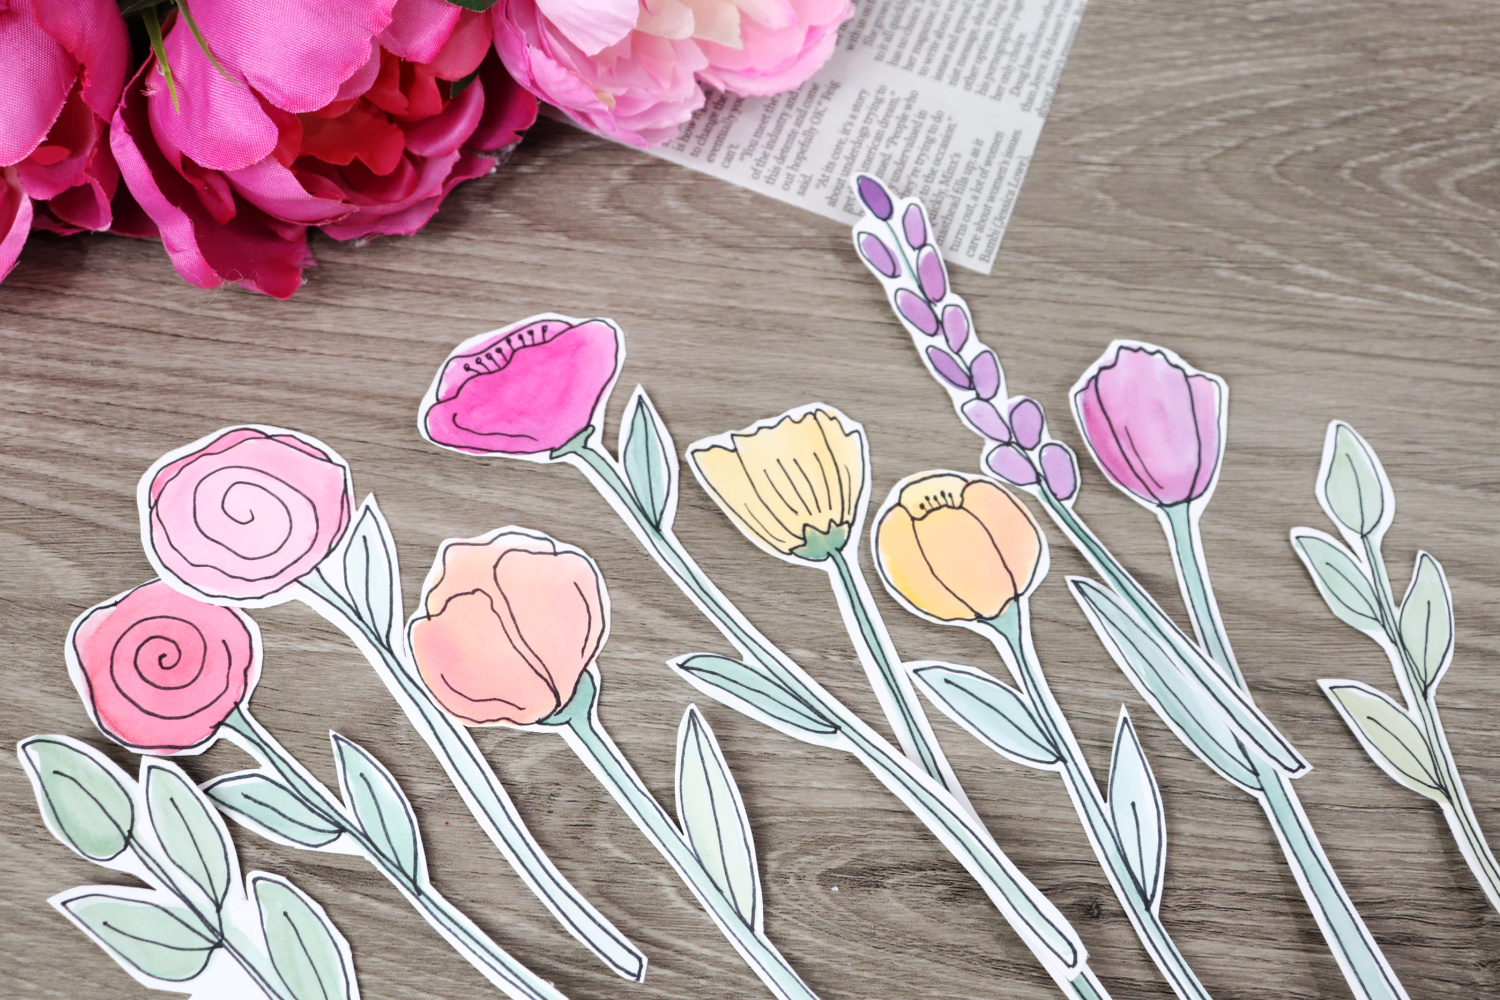 Image contains eight colorful pink, yellow, orange, and purple watercolor flowers and two leafy stems, all cut out close to the outlines. They sit on a wooden surface with faux flowers and a piece of newspaper in the background.